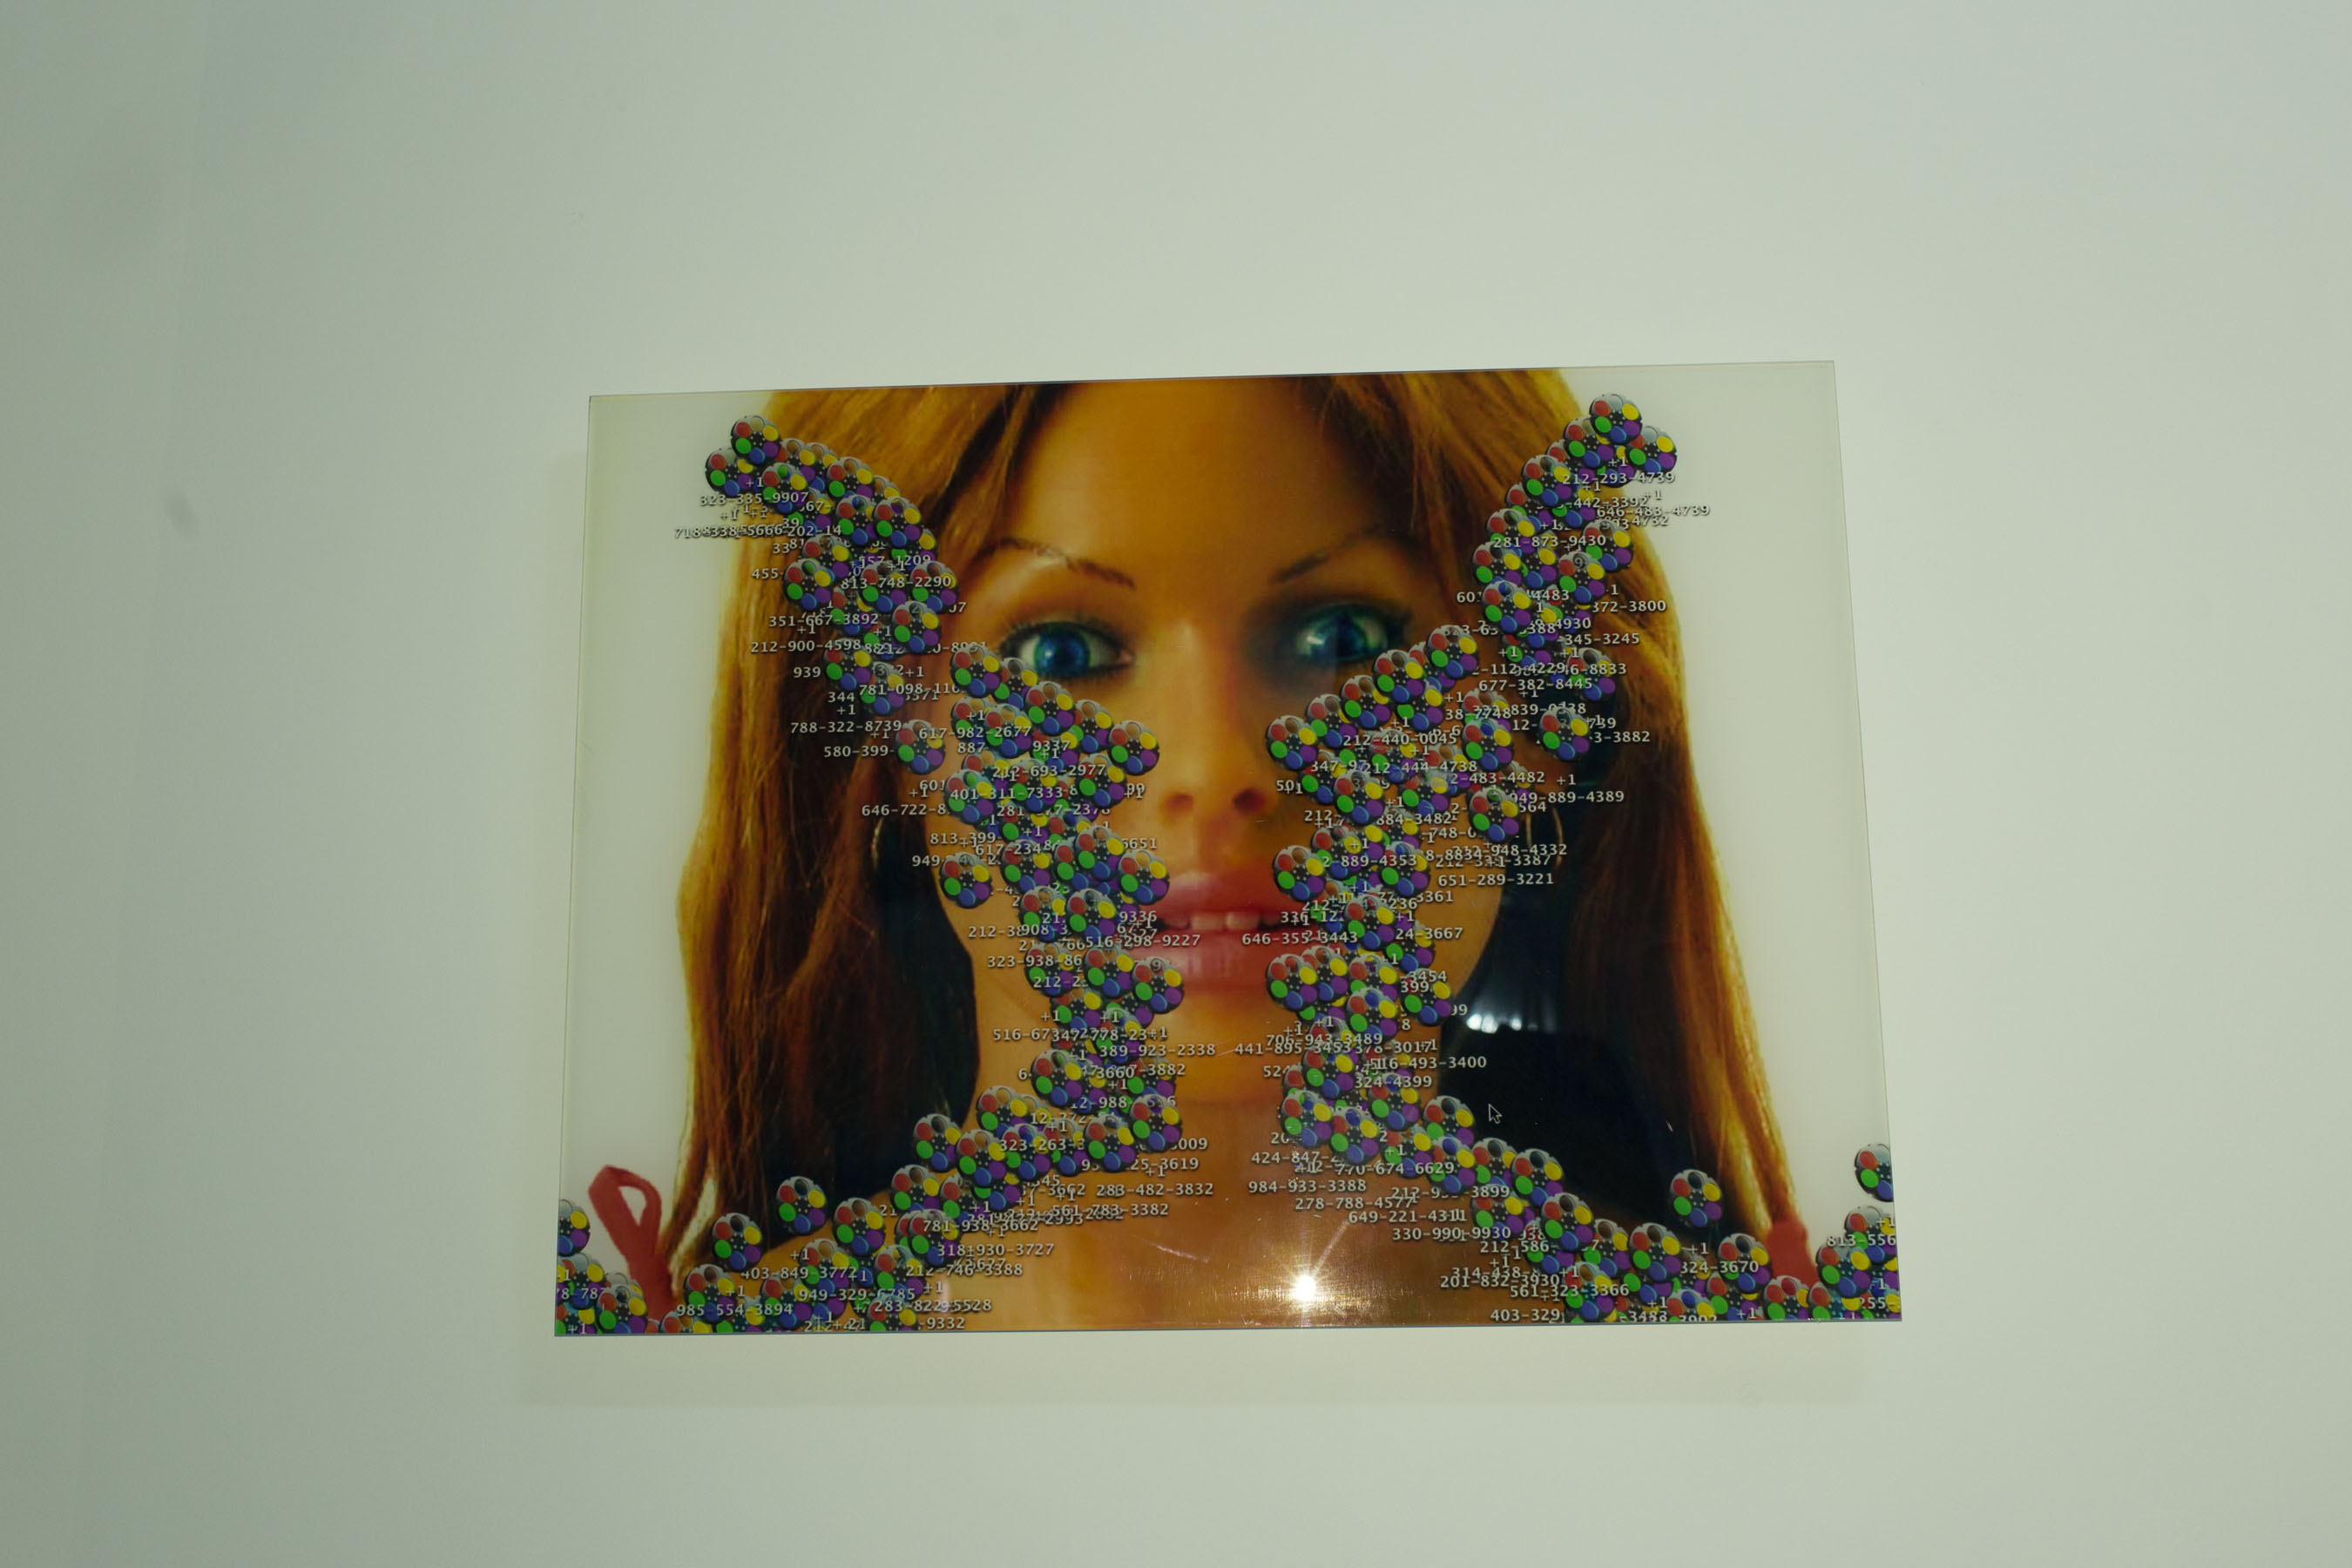 A wall work by Jessie Stead: a print of a real doll face covered partially by files, as if on a desktop background